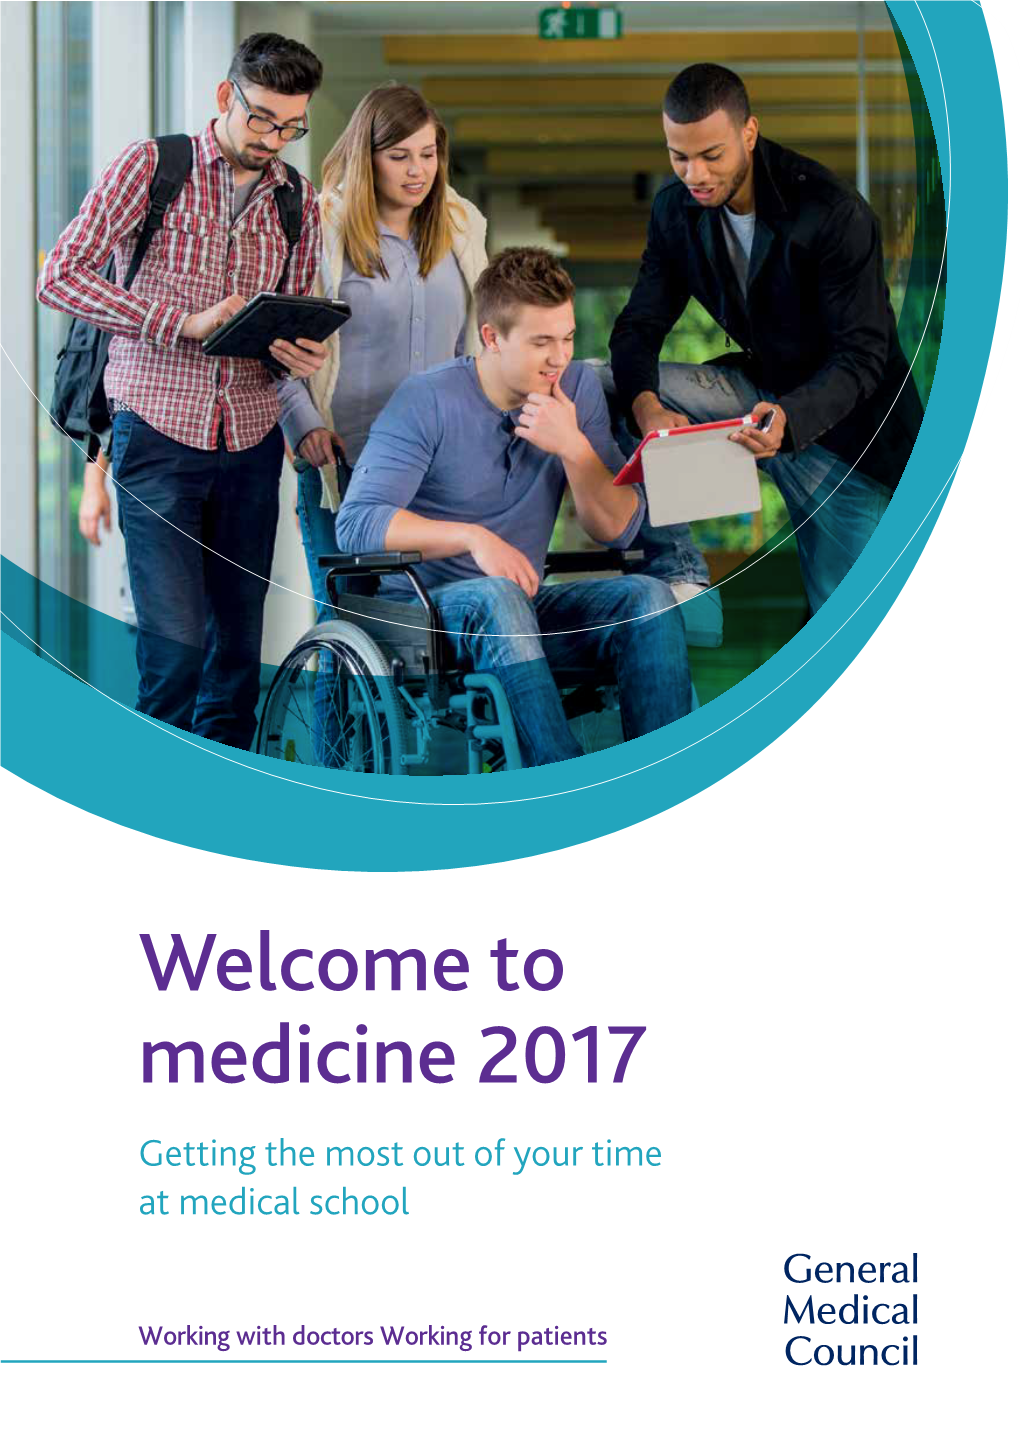 Welcome to Medicine 2017 Getting the Most out of Your Time at Medical School Get to Know Us